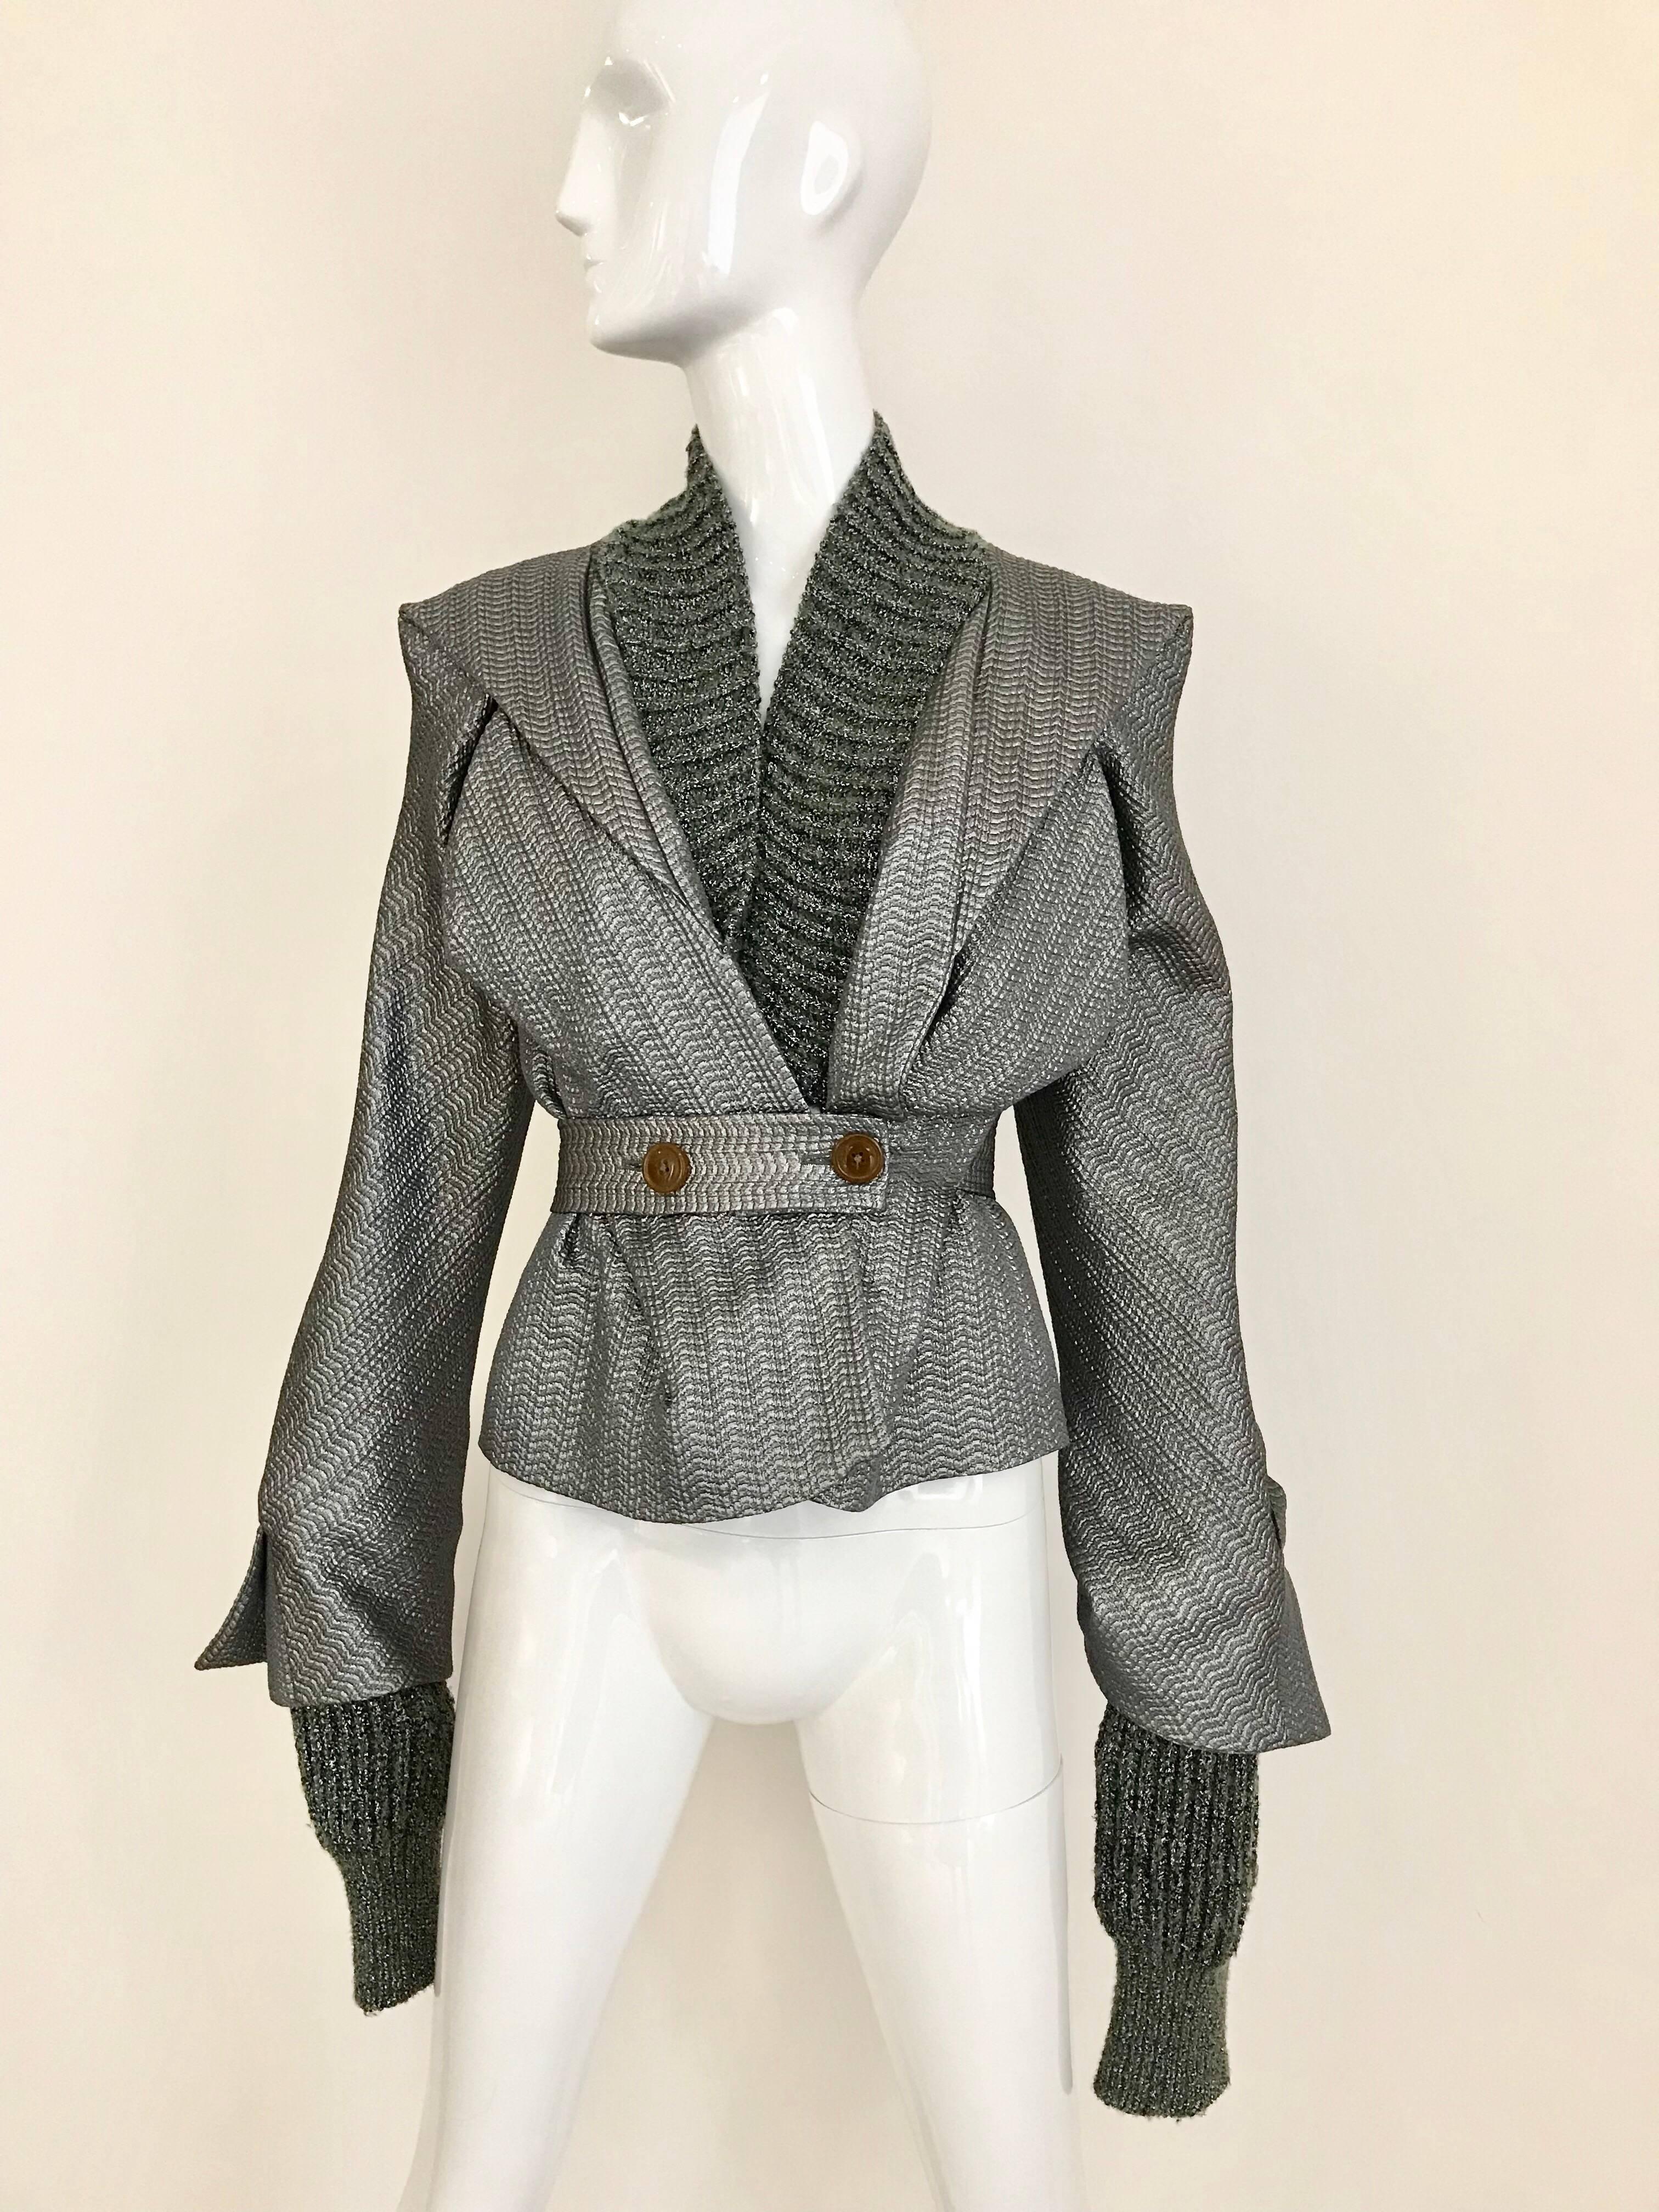 Incredible Vivienne Westwood Metallic Silver Grey and Dark Green Knit jacket.
Collar and Sleeves has combination of Knit and lurex fabric. Exaggerated longer sleeves so you can fold.  Best fit US size Small /2 
Bust: 32